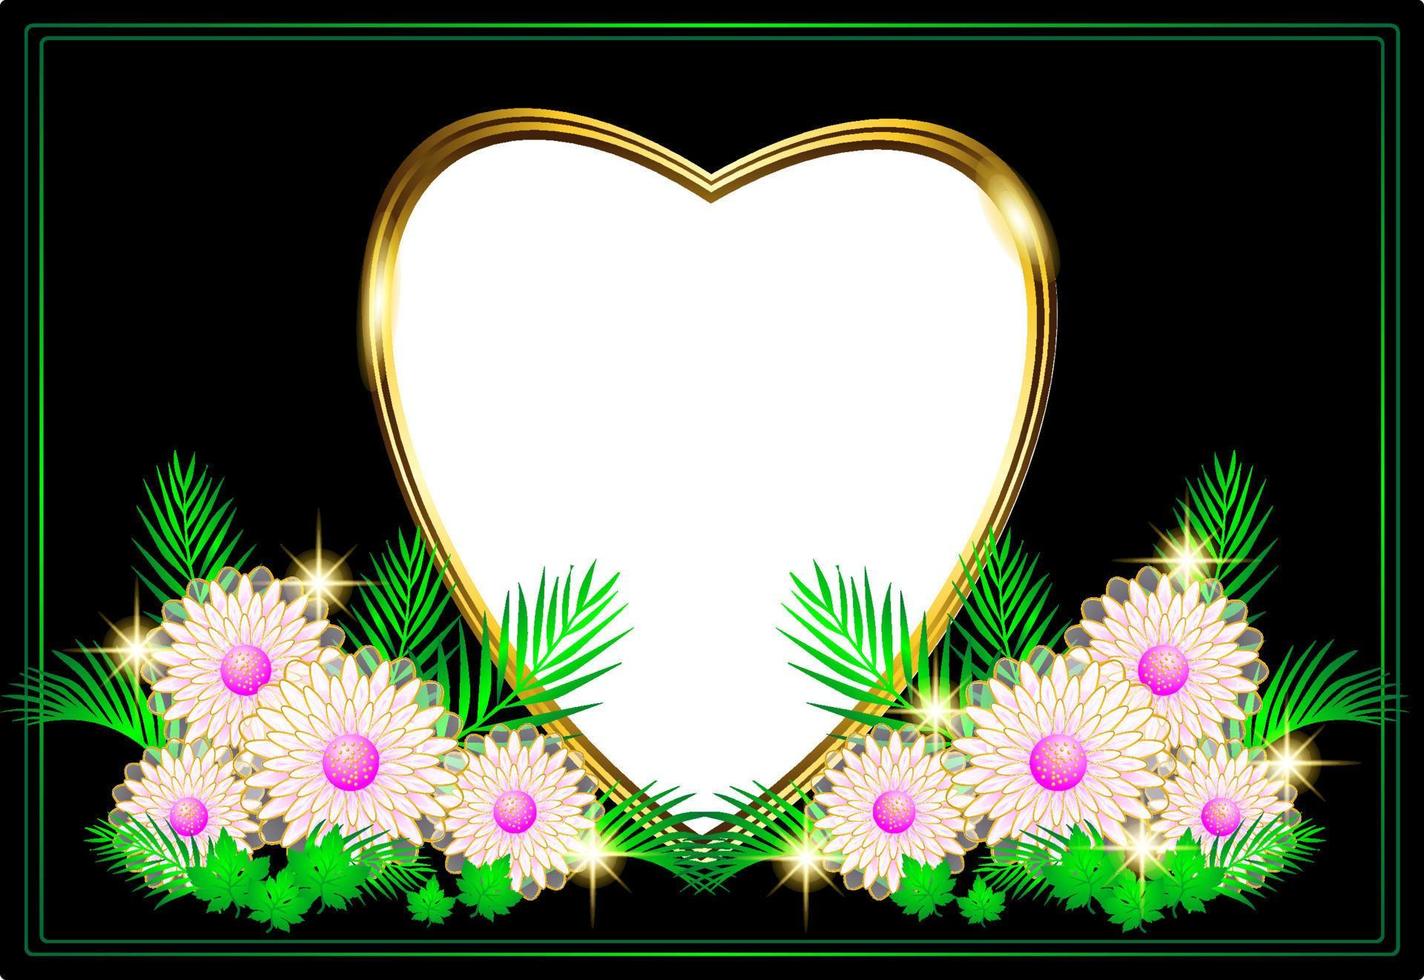 Golden frame heart and flower with transparent background vector